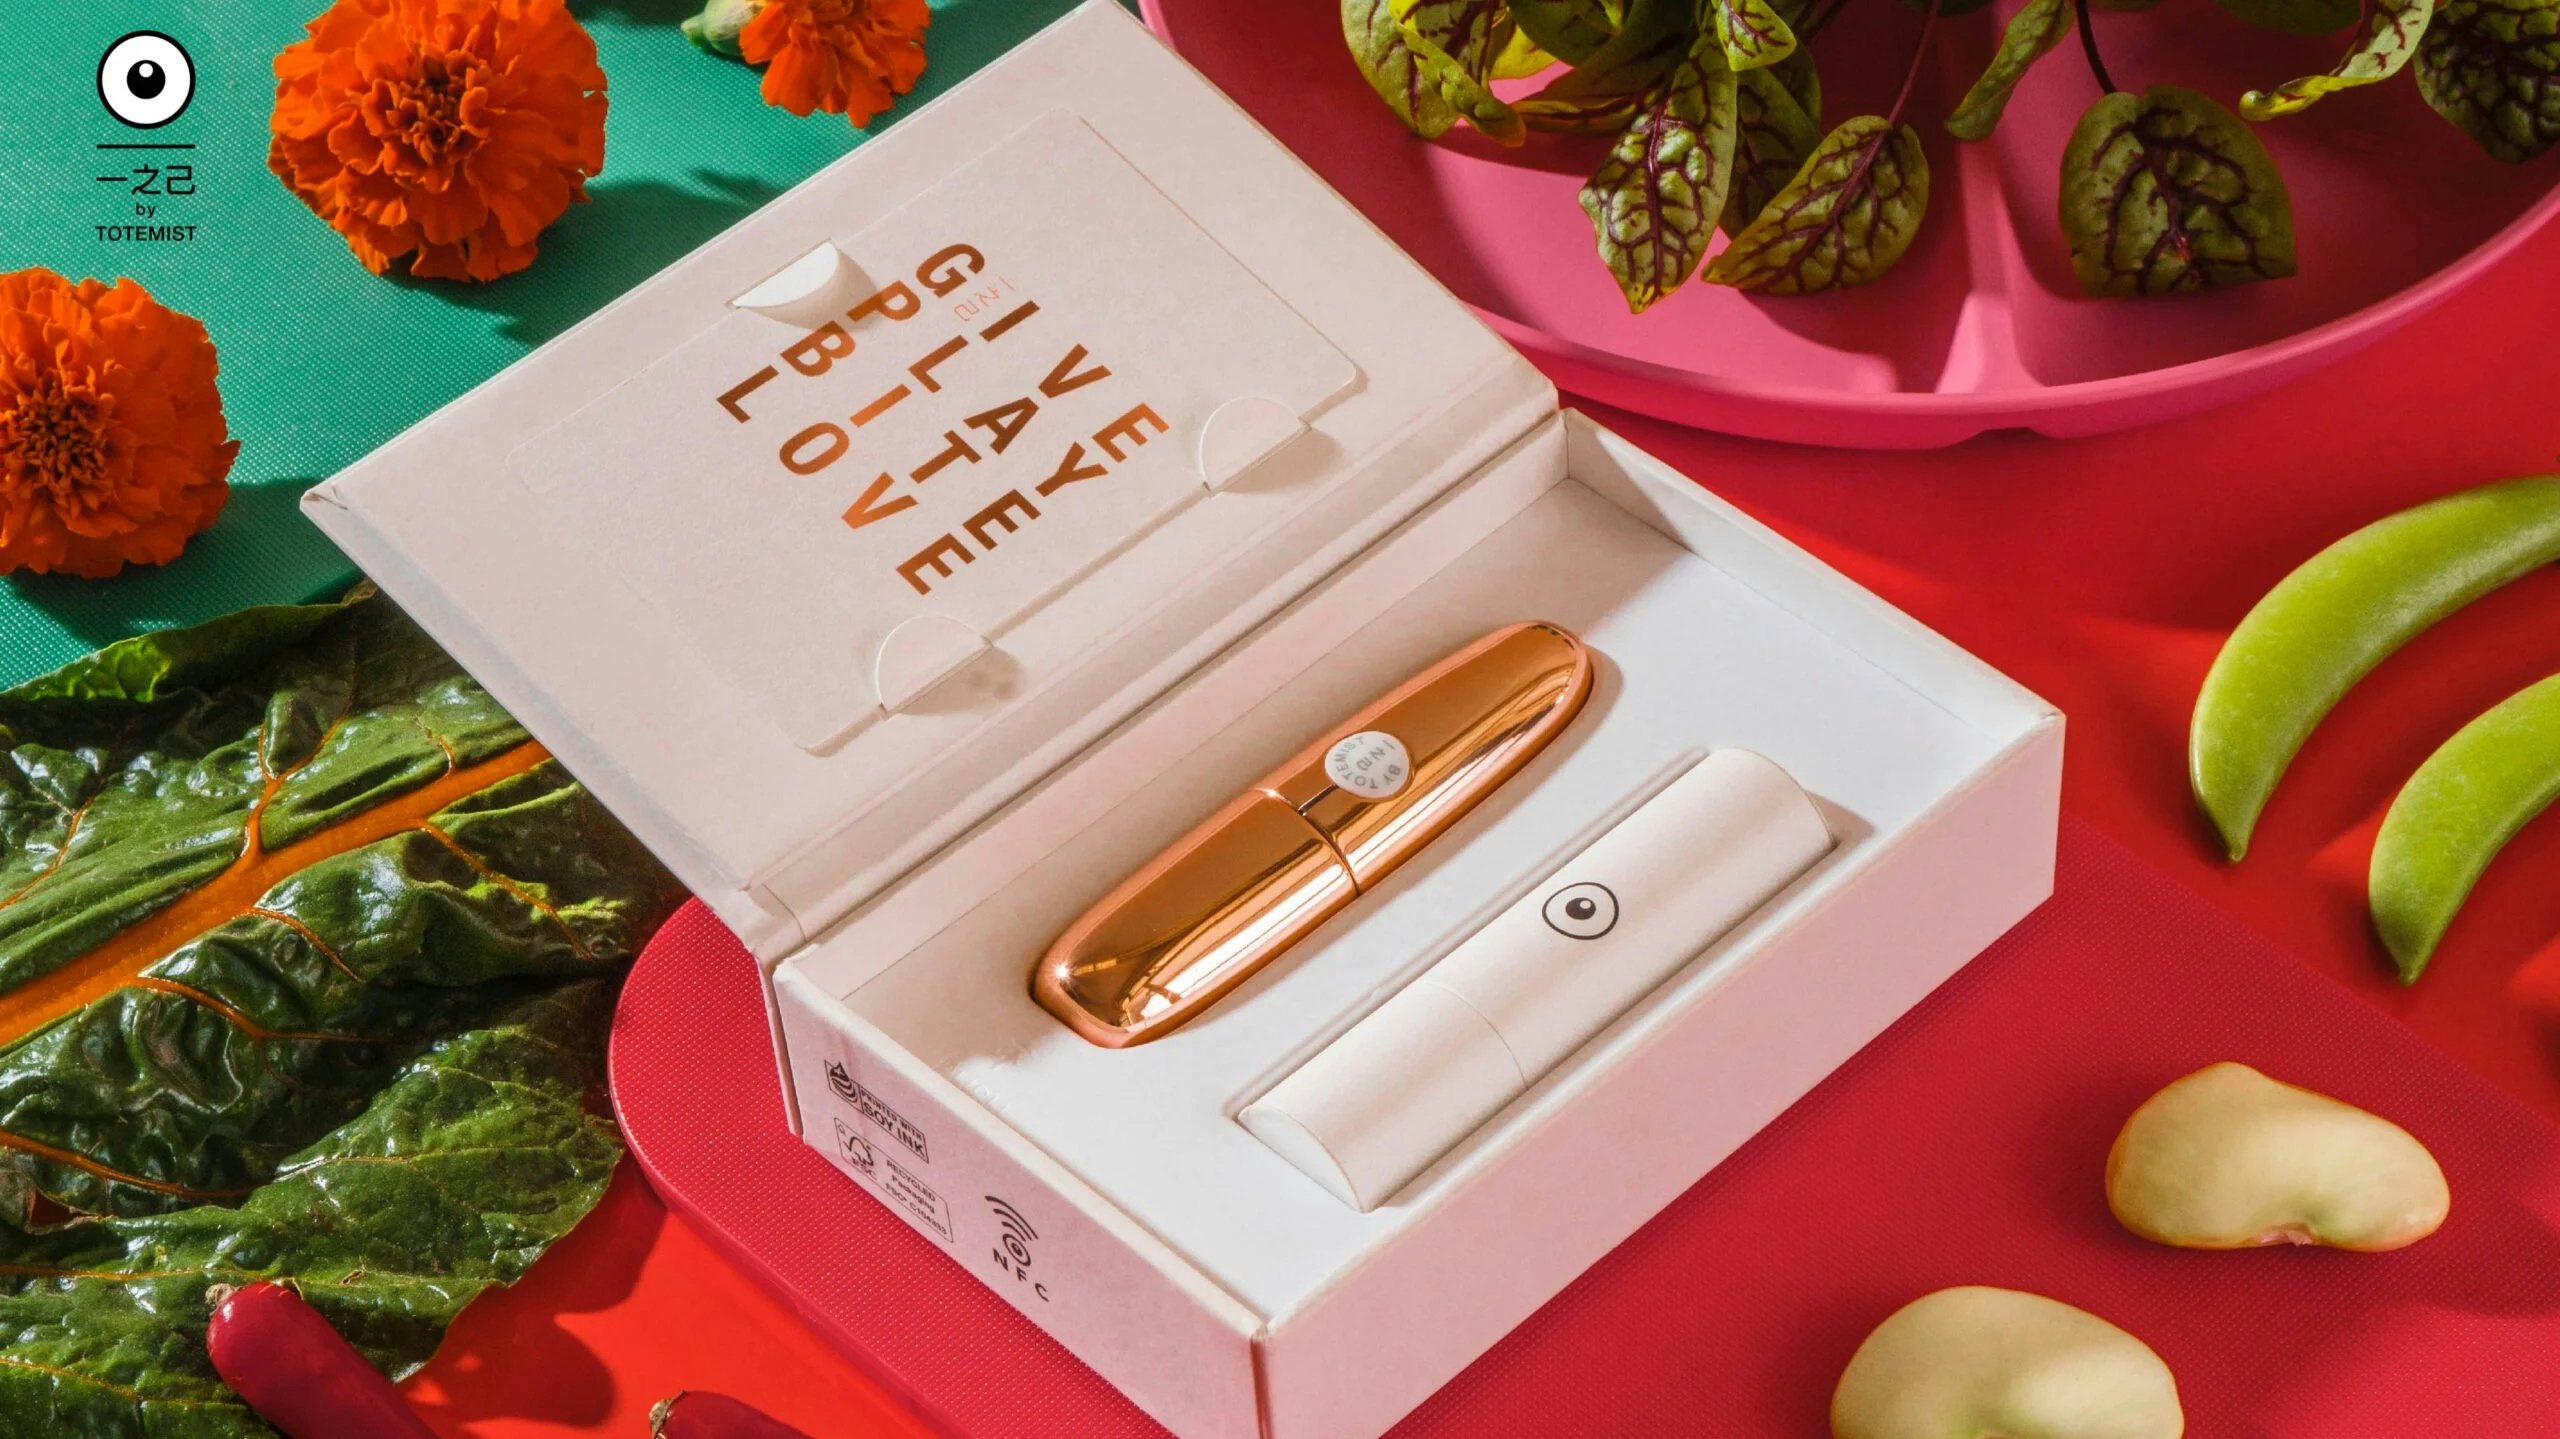 Totemist's debut product is an NFC-connected lipstick. Photo: Totemist